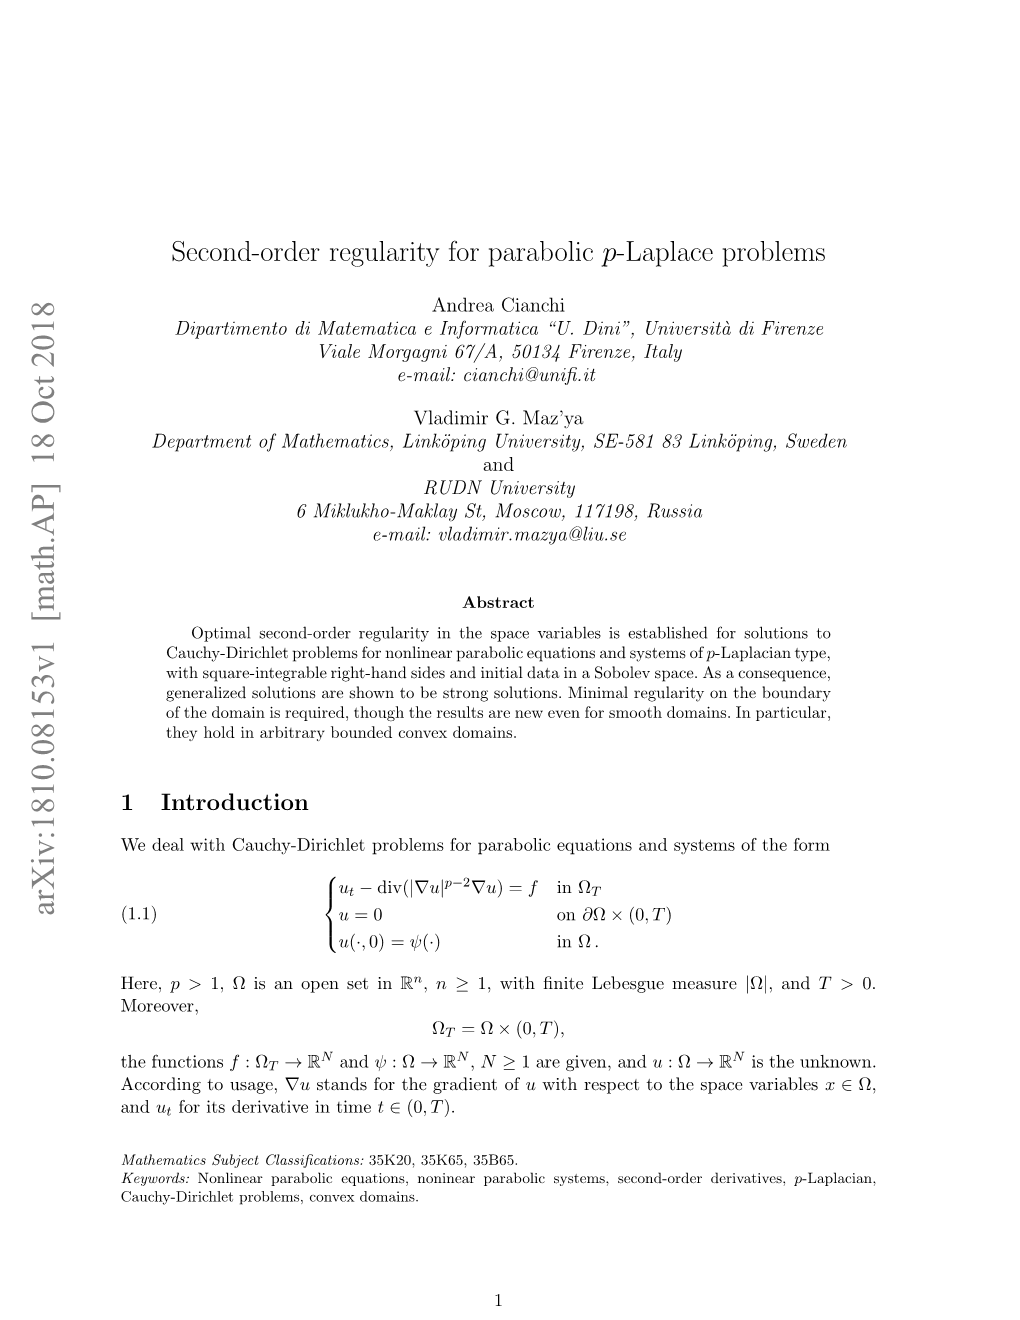 Second-Order Regularity for Parabolic P-Laplace Problems